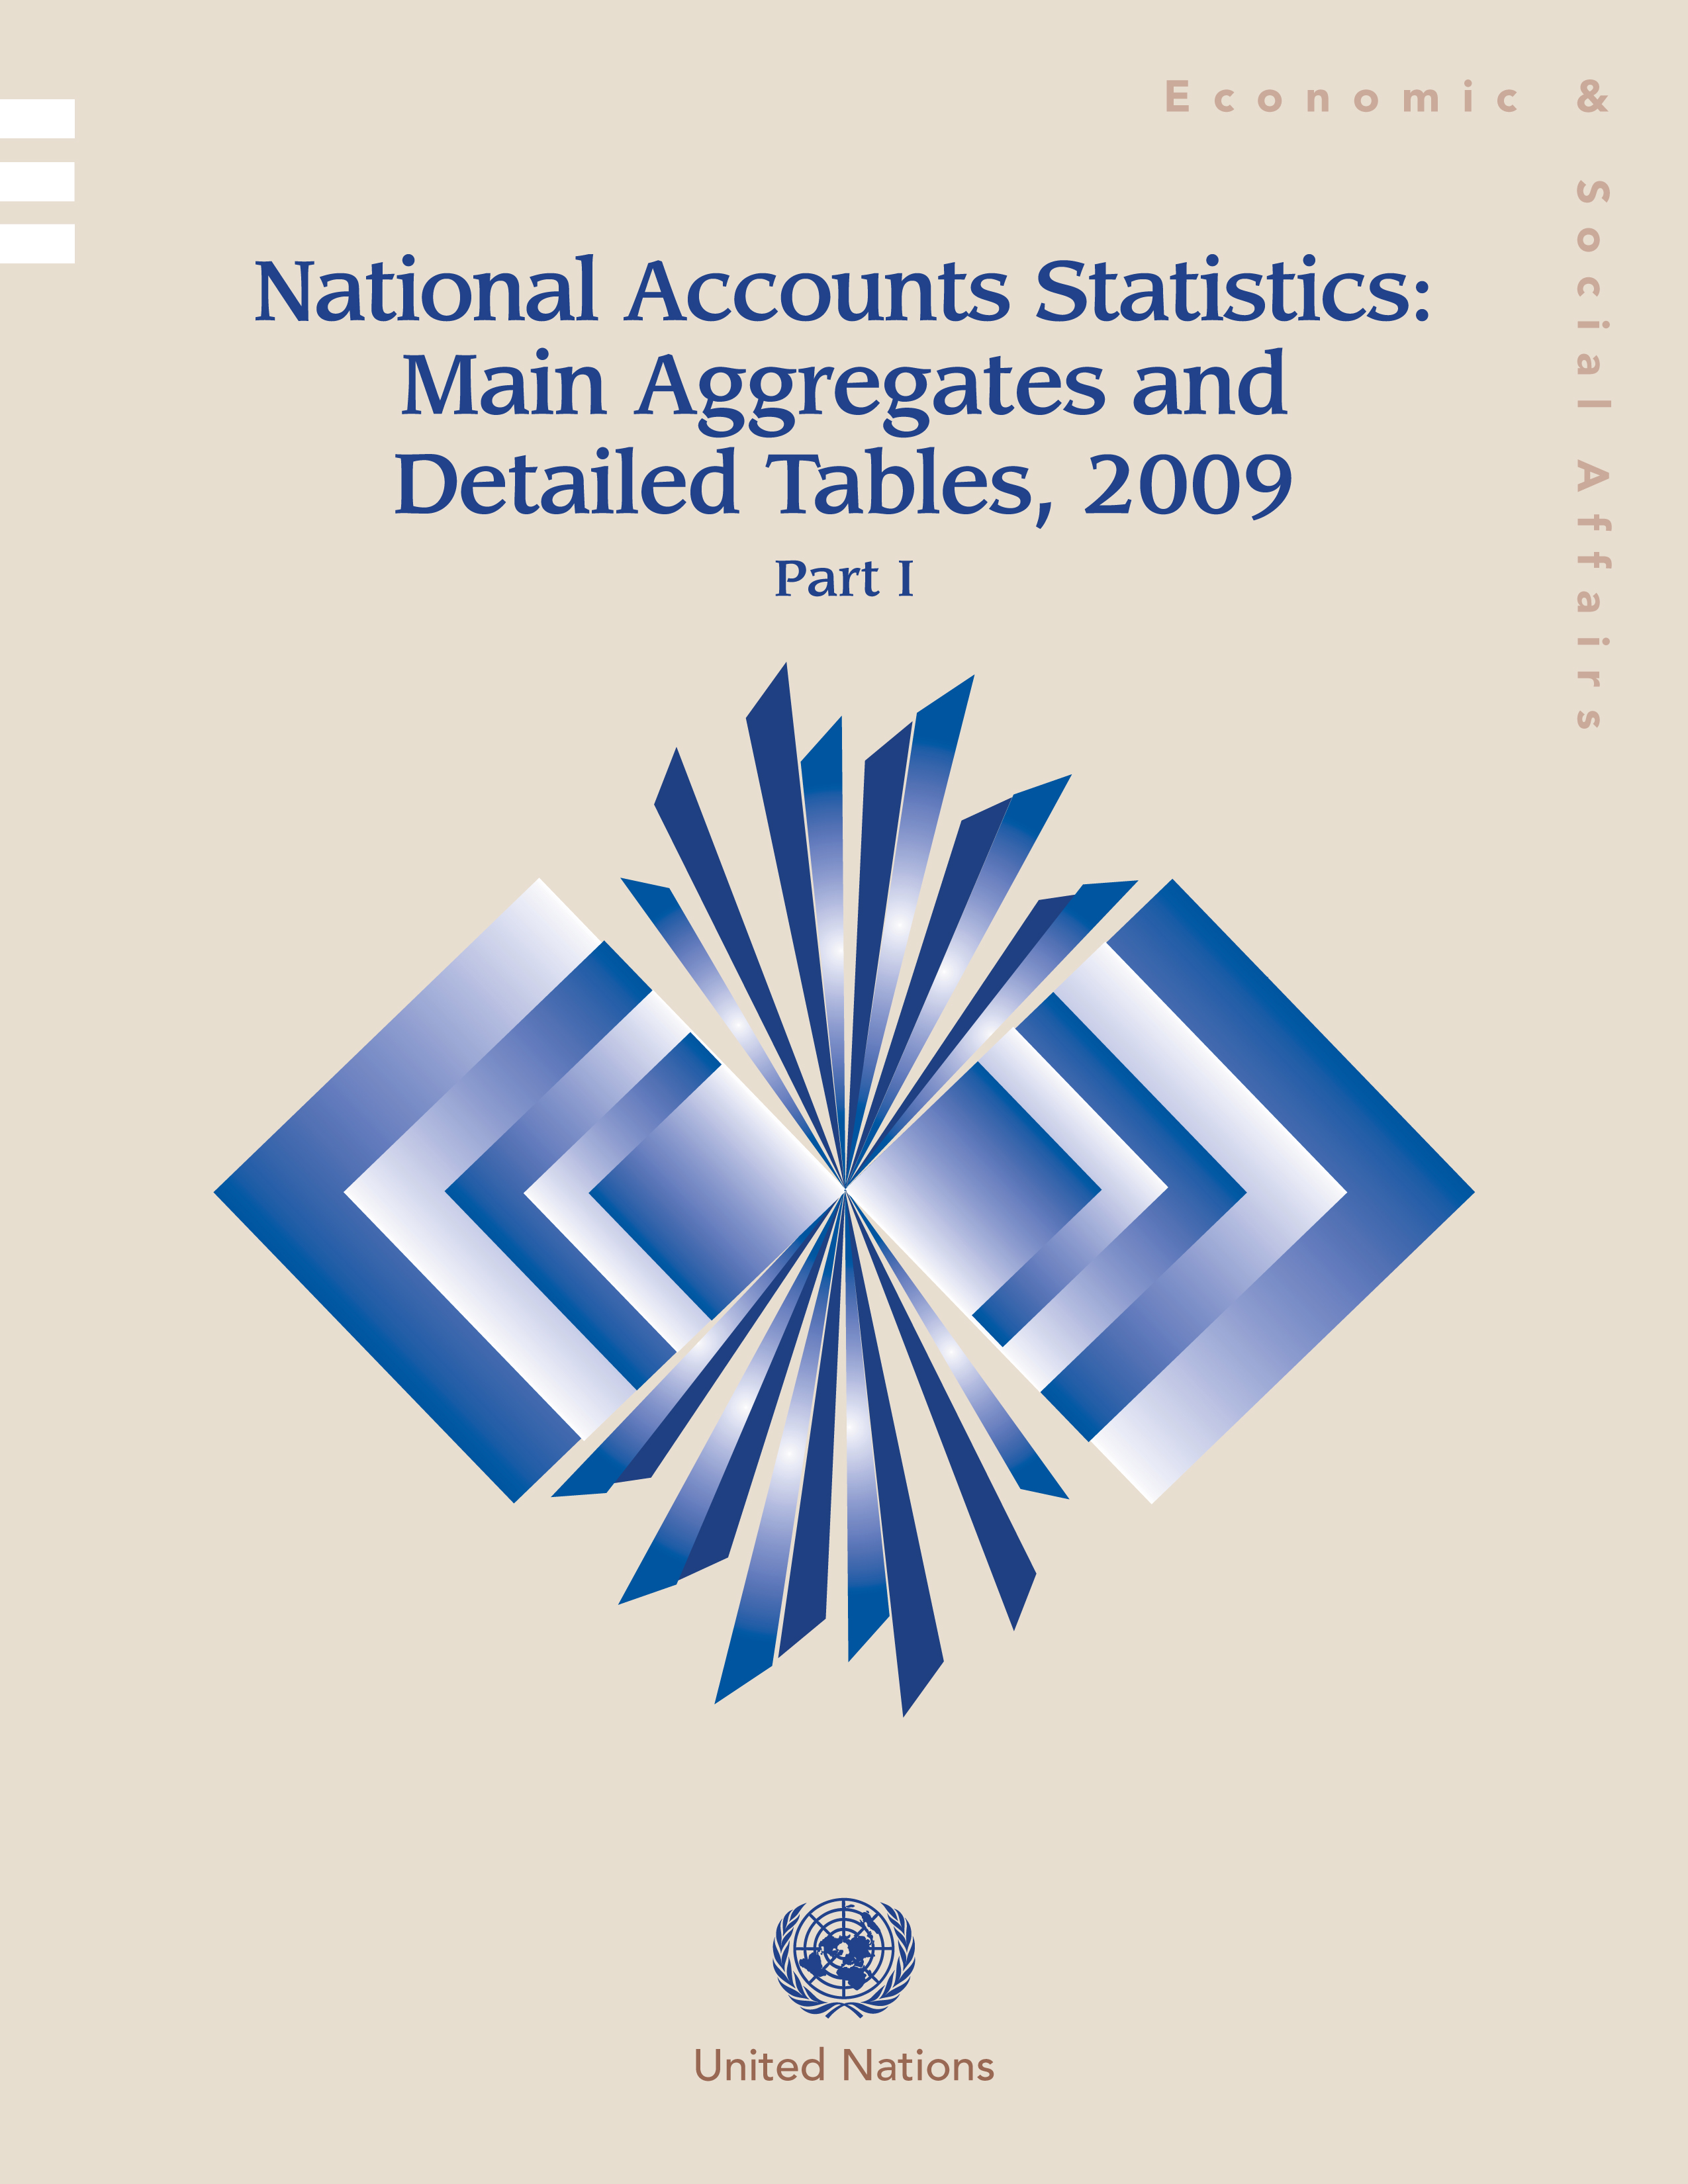 image of National Accounts Statistics: Main Aggregates and Detailed Tables 2009